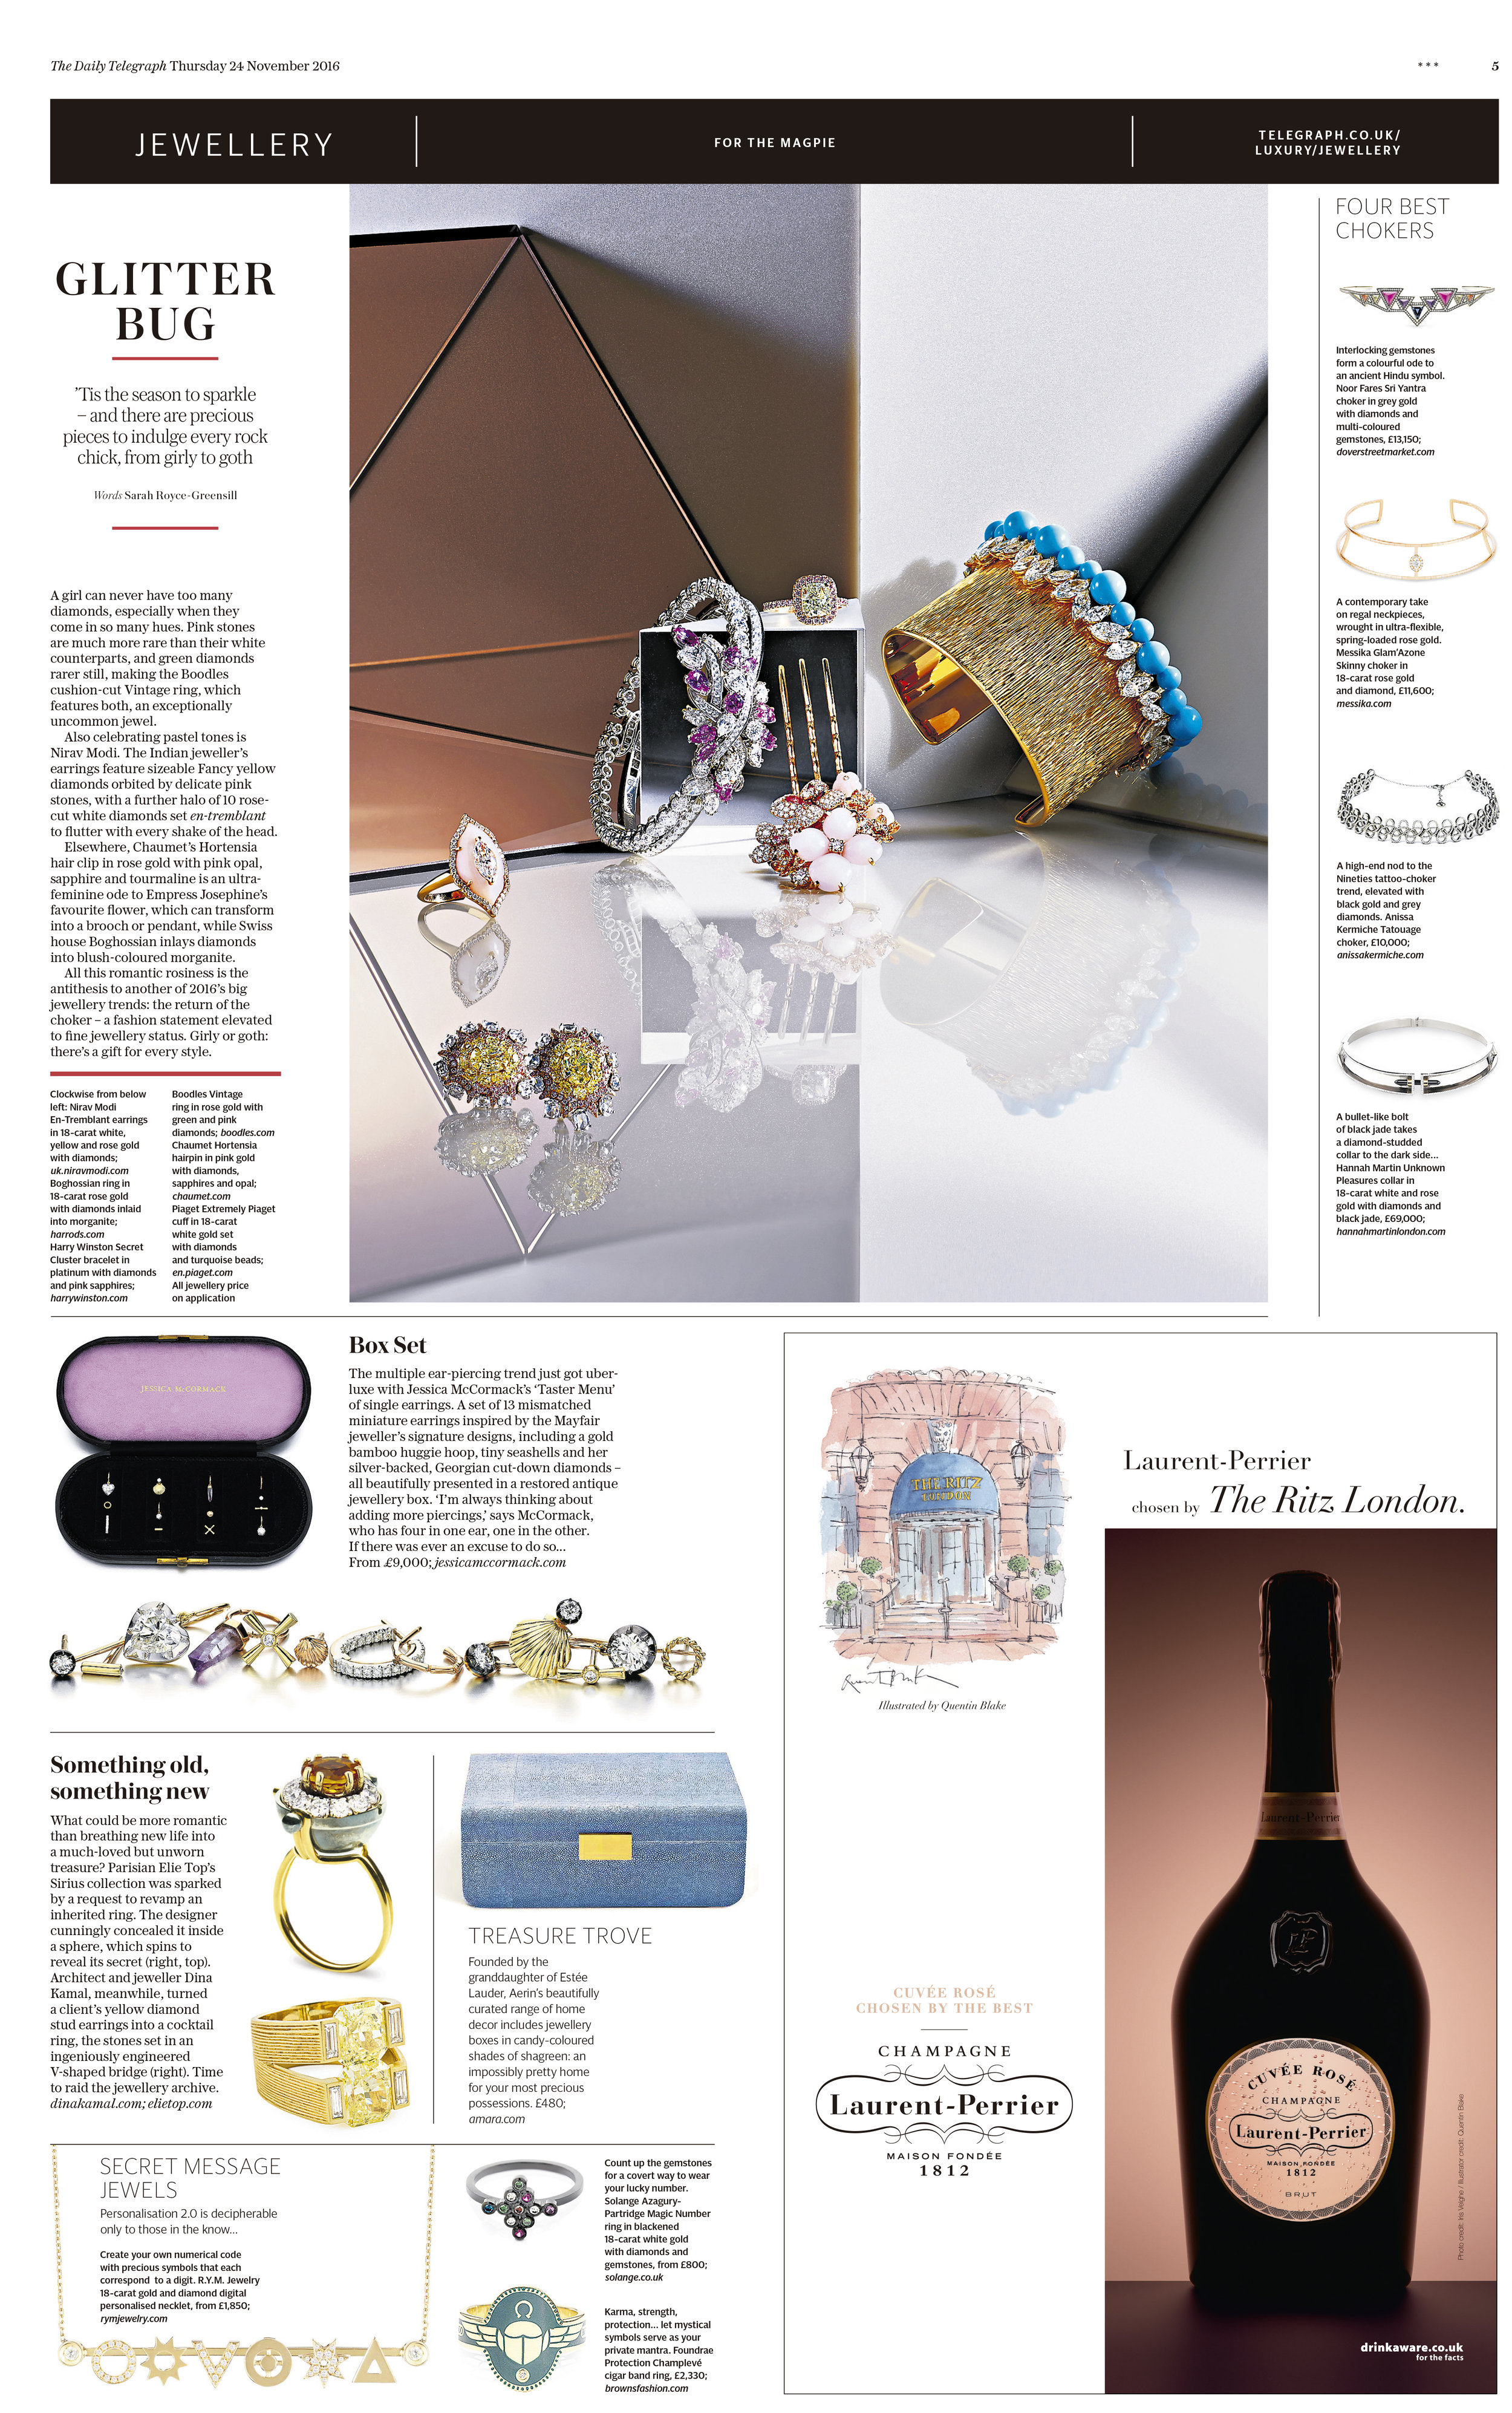 The Daily Telegraph Luxury - Christmas Gift Guide (2).jpg